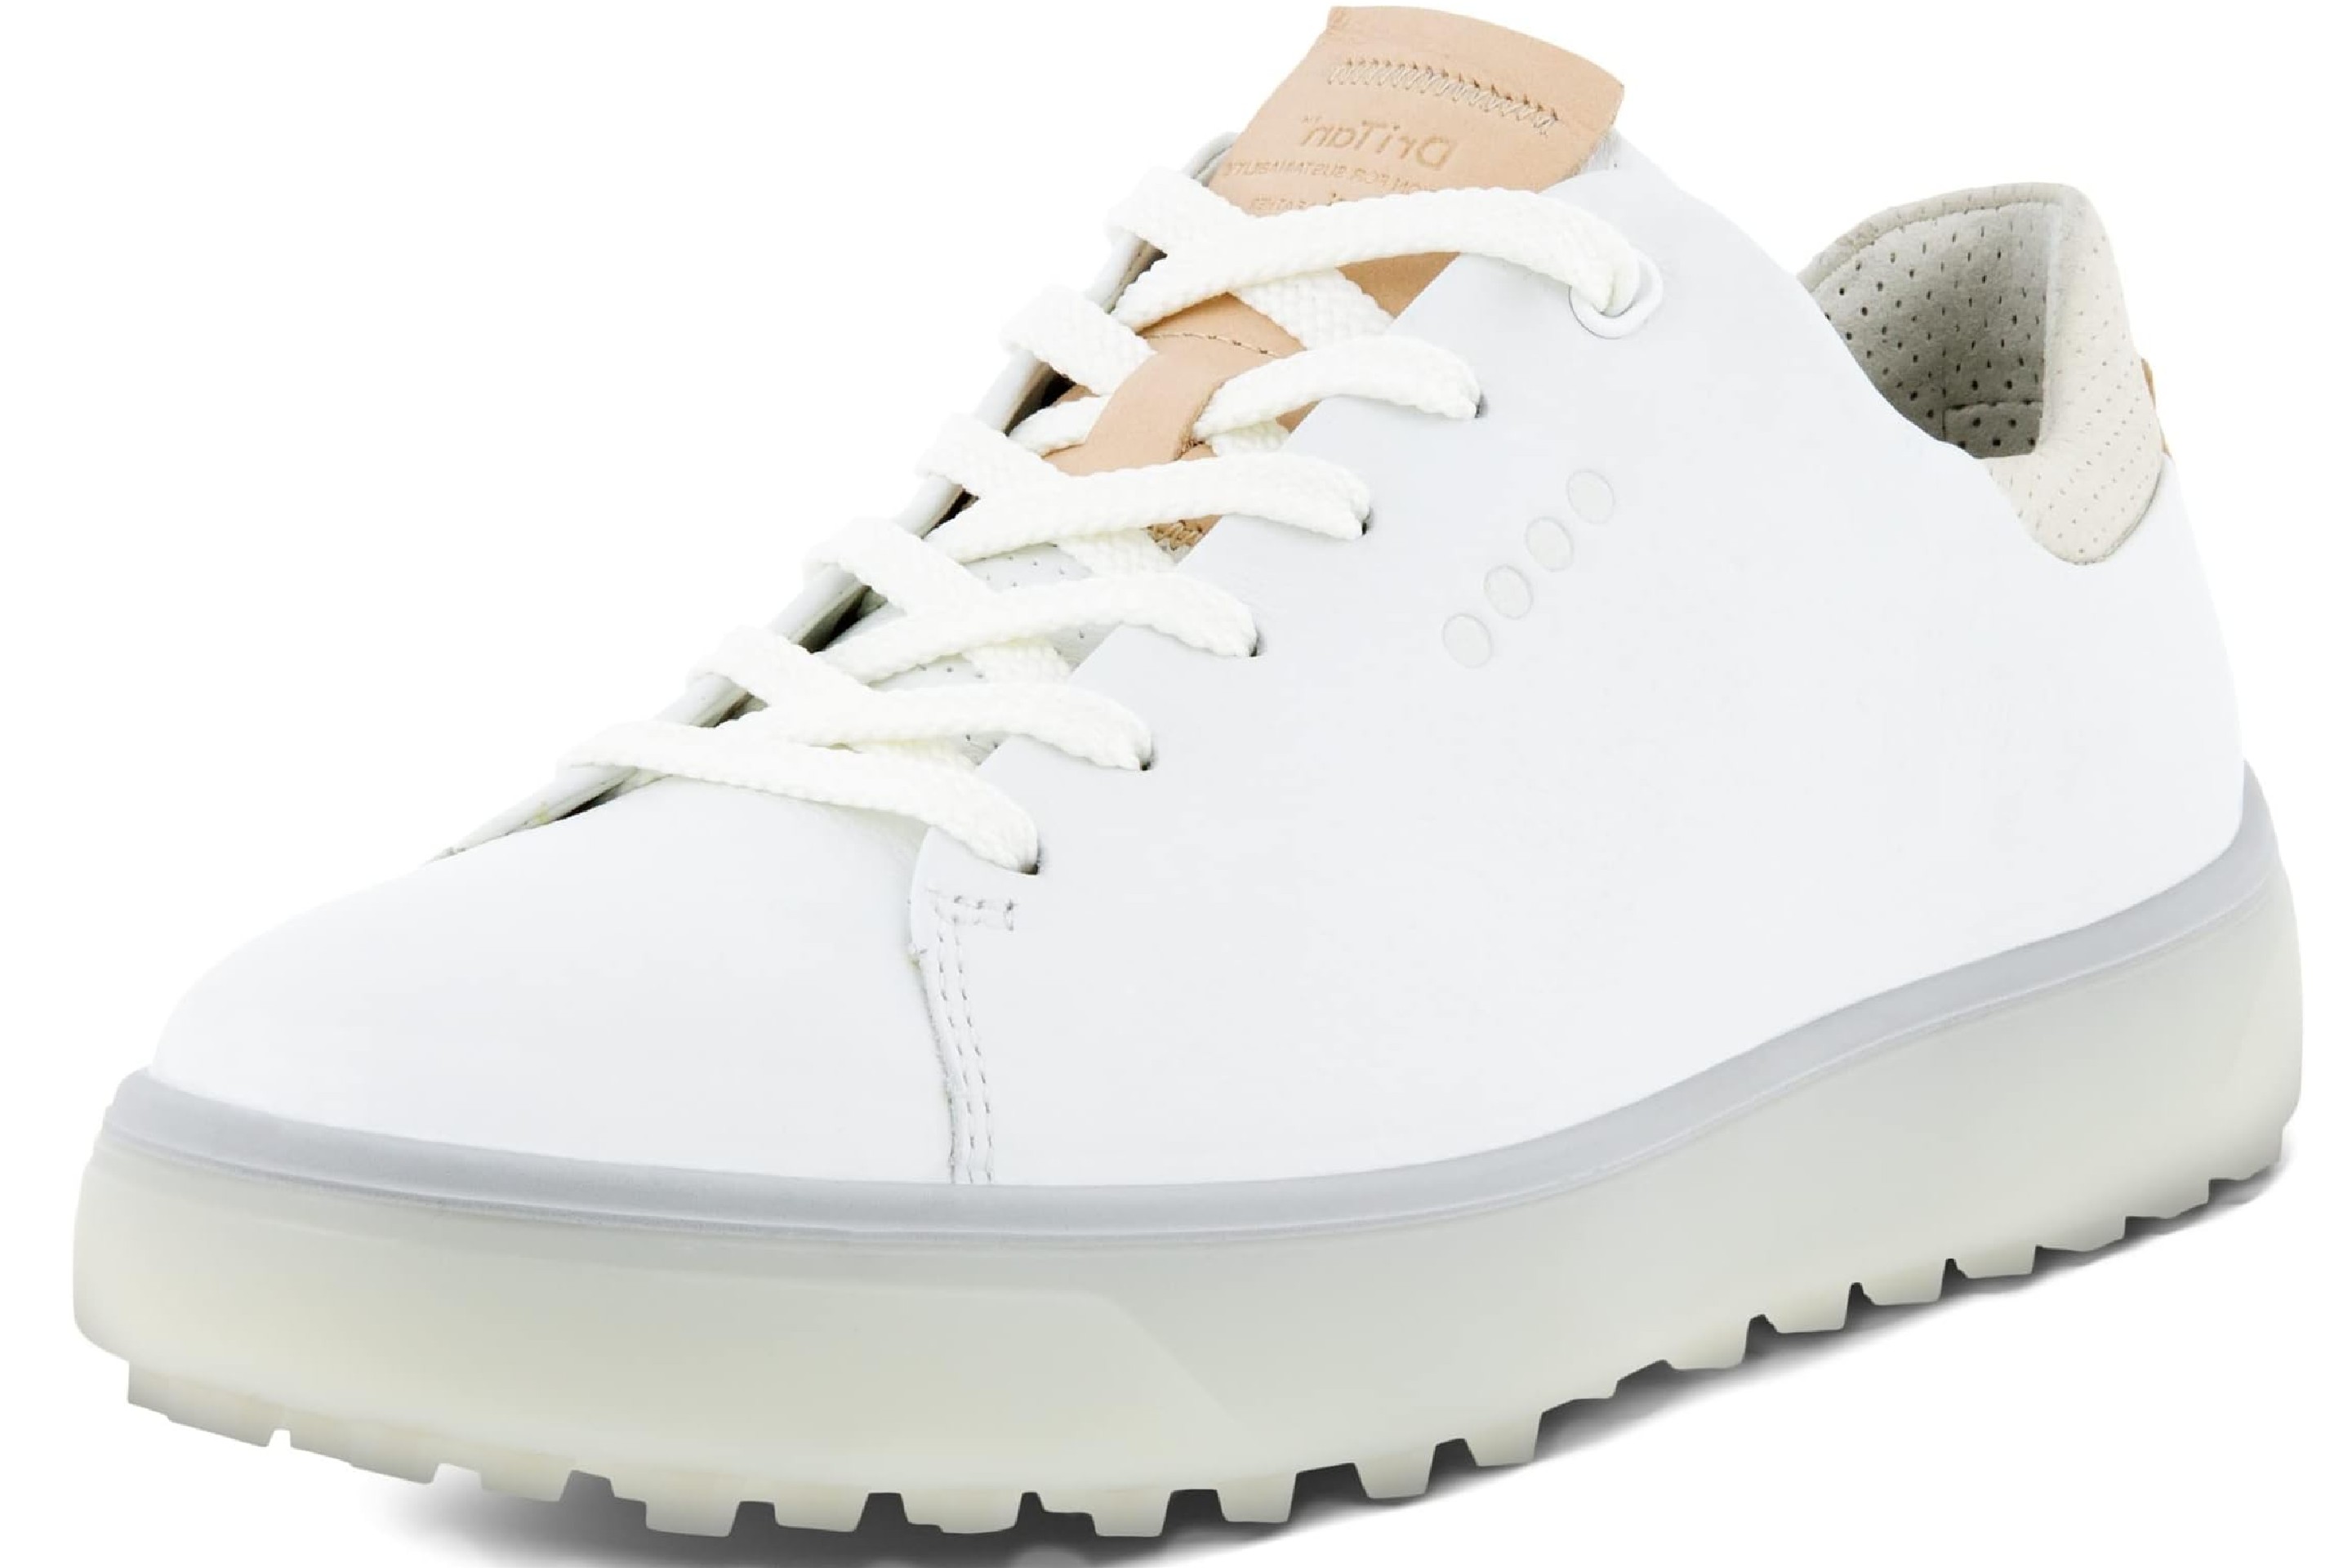 ECCO Women's Tray Spikeless Golf Shoes